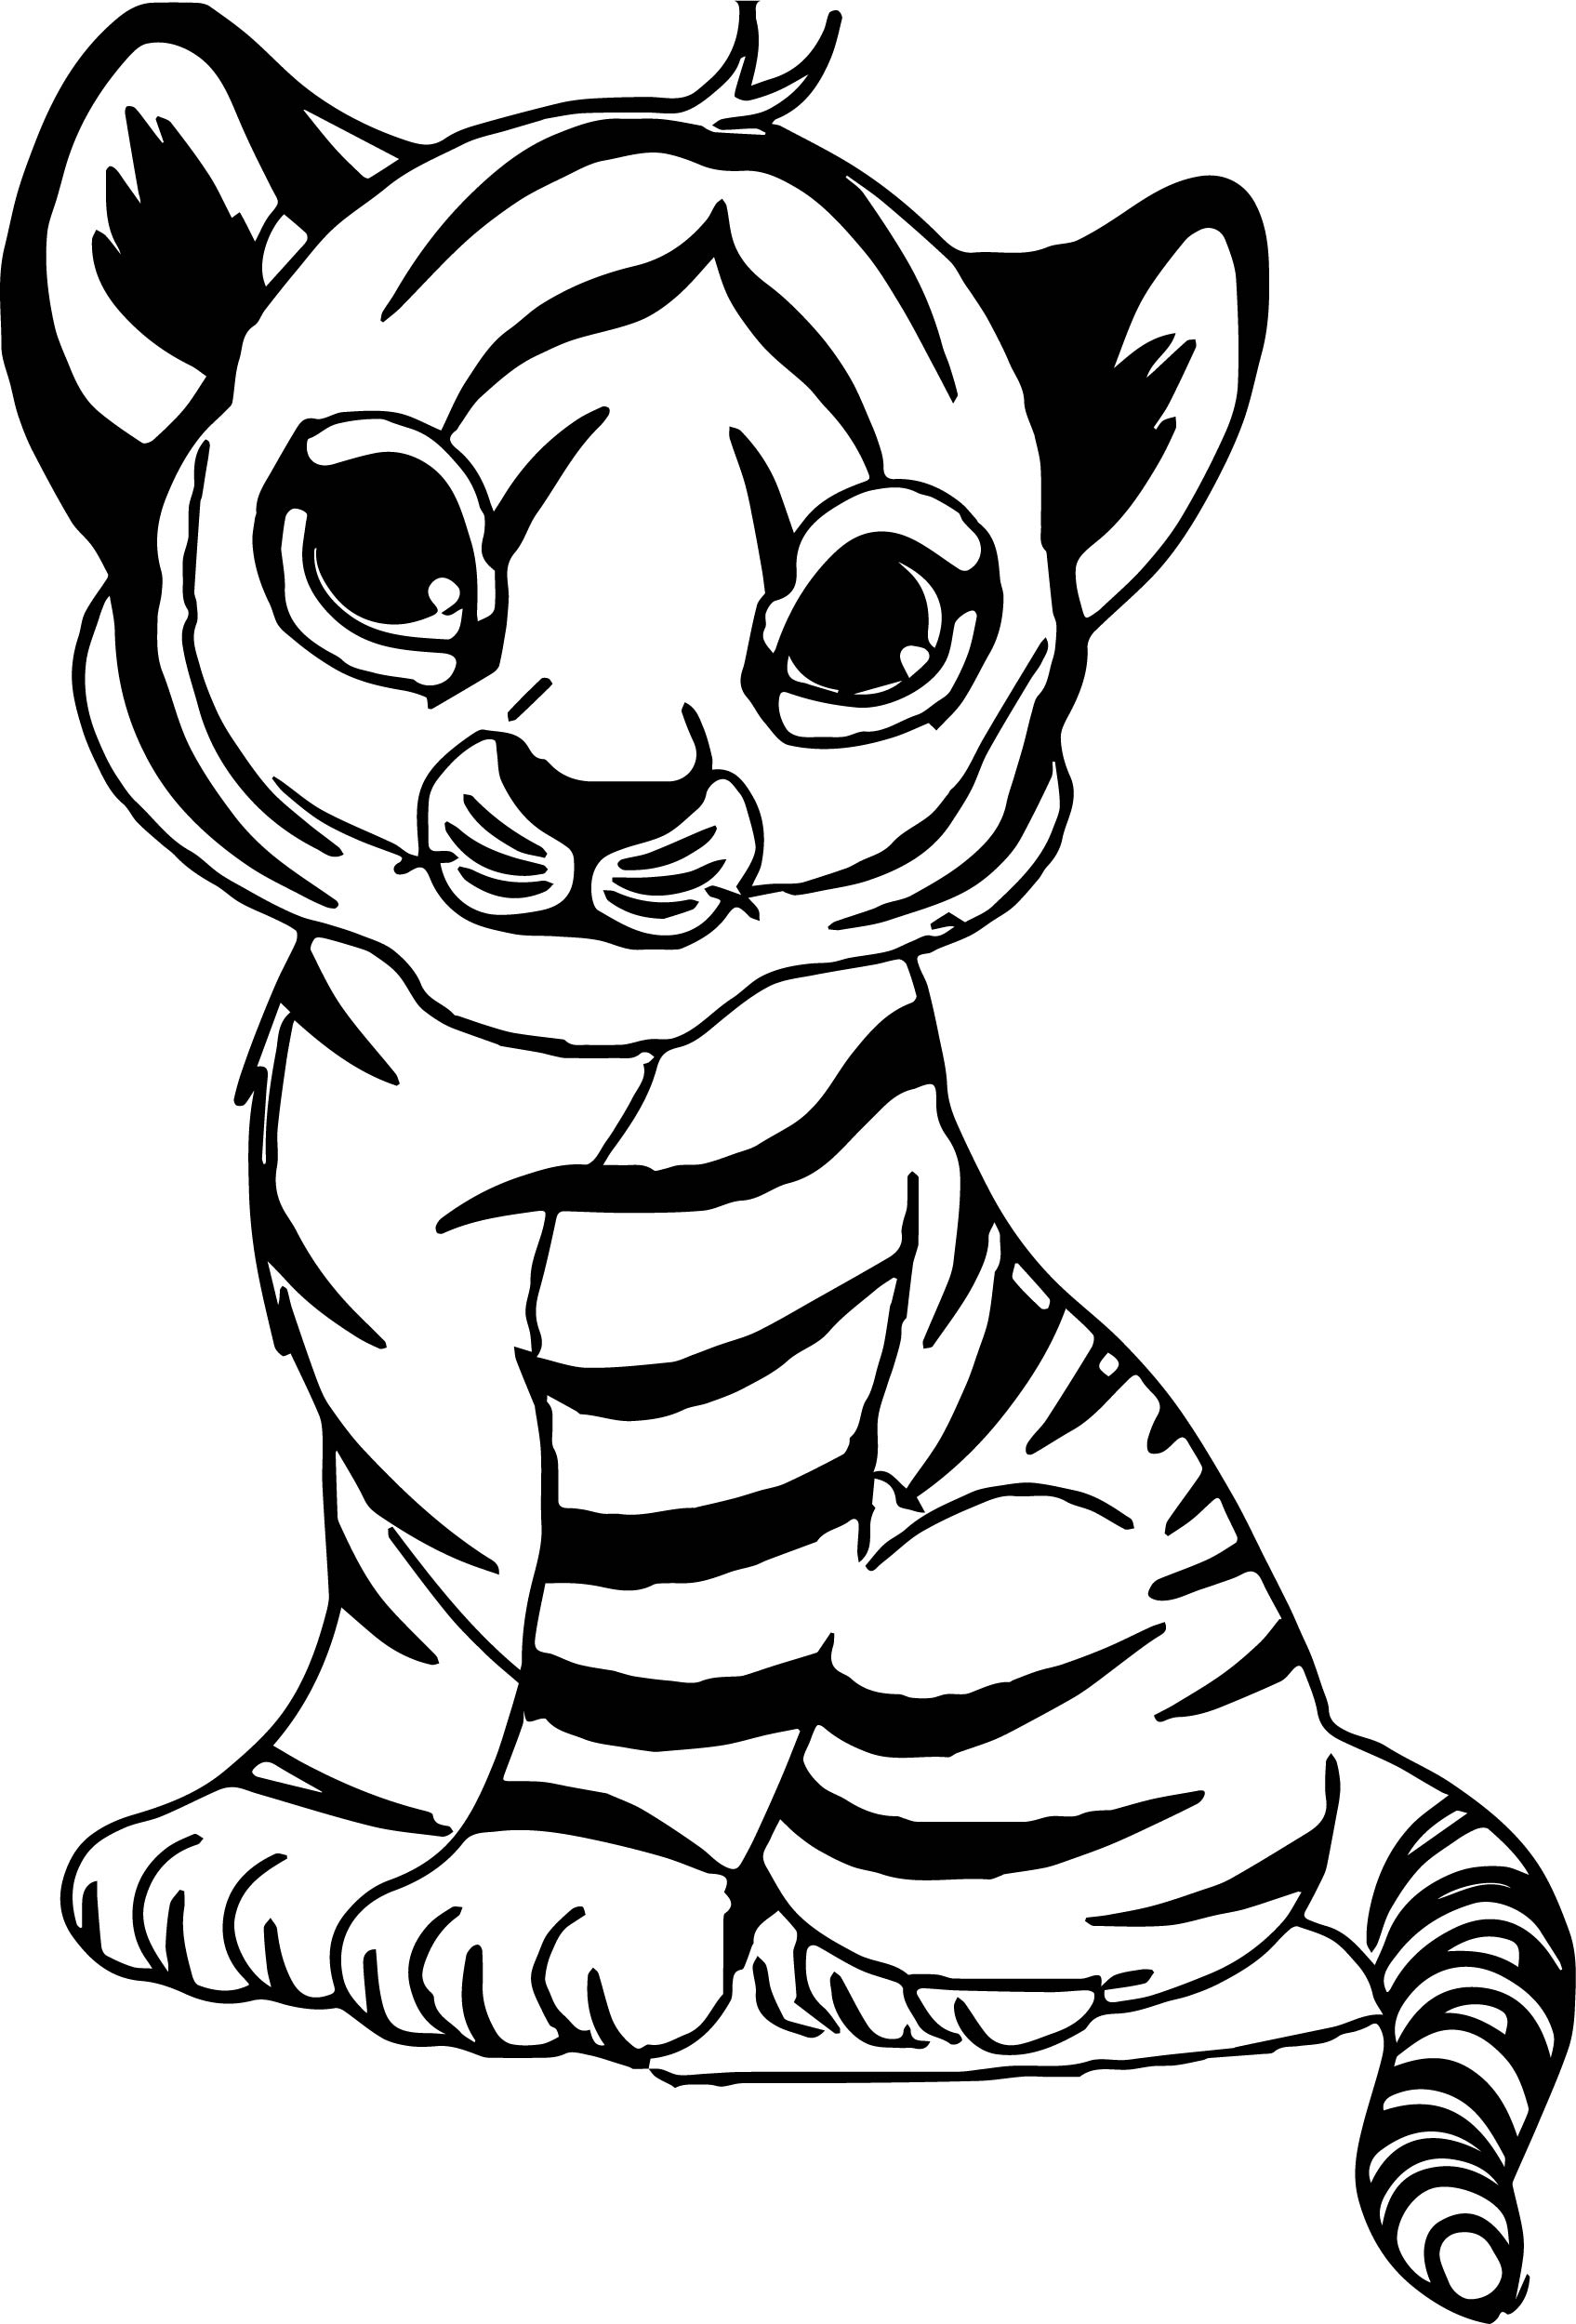 The Cutest Baby Tiger Coloring Page - Free Printable Coloring Pages for